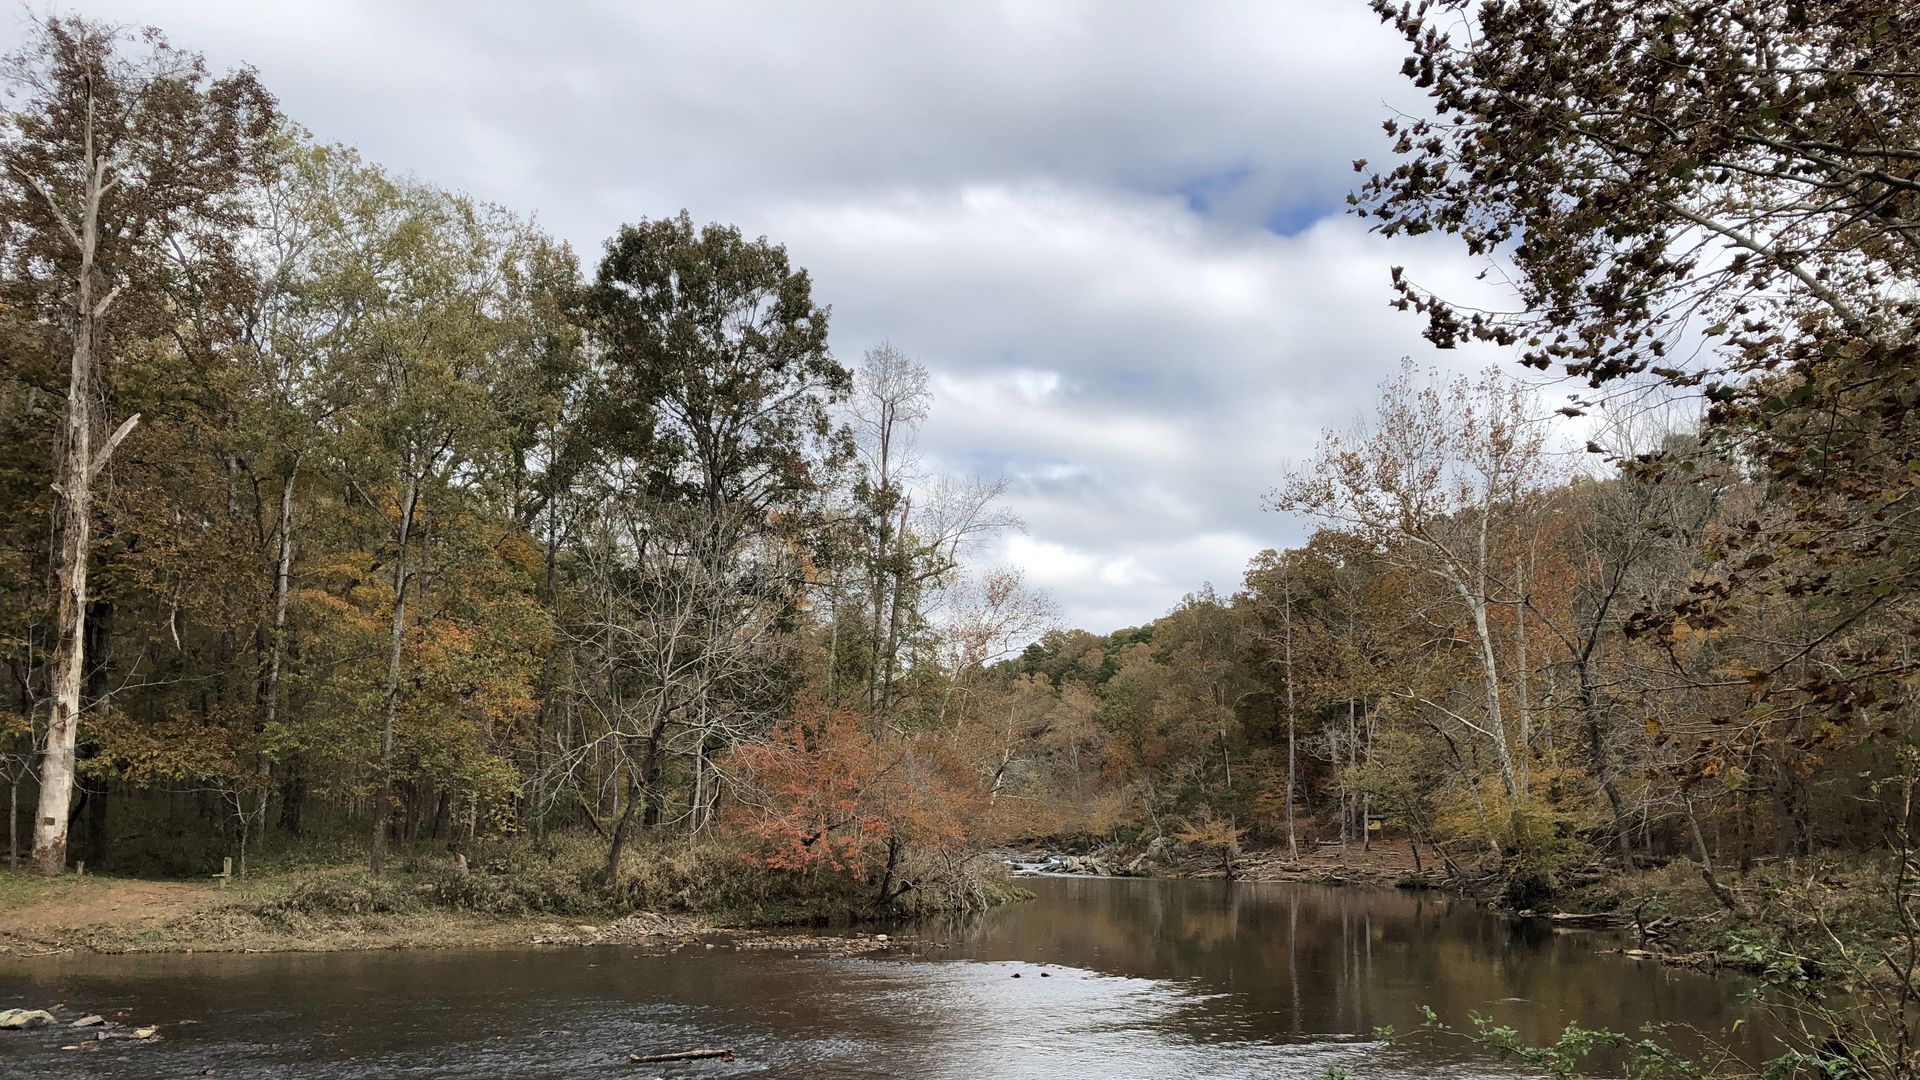 A view of the Eno River